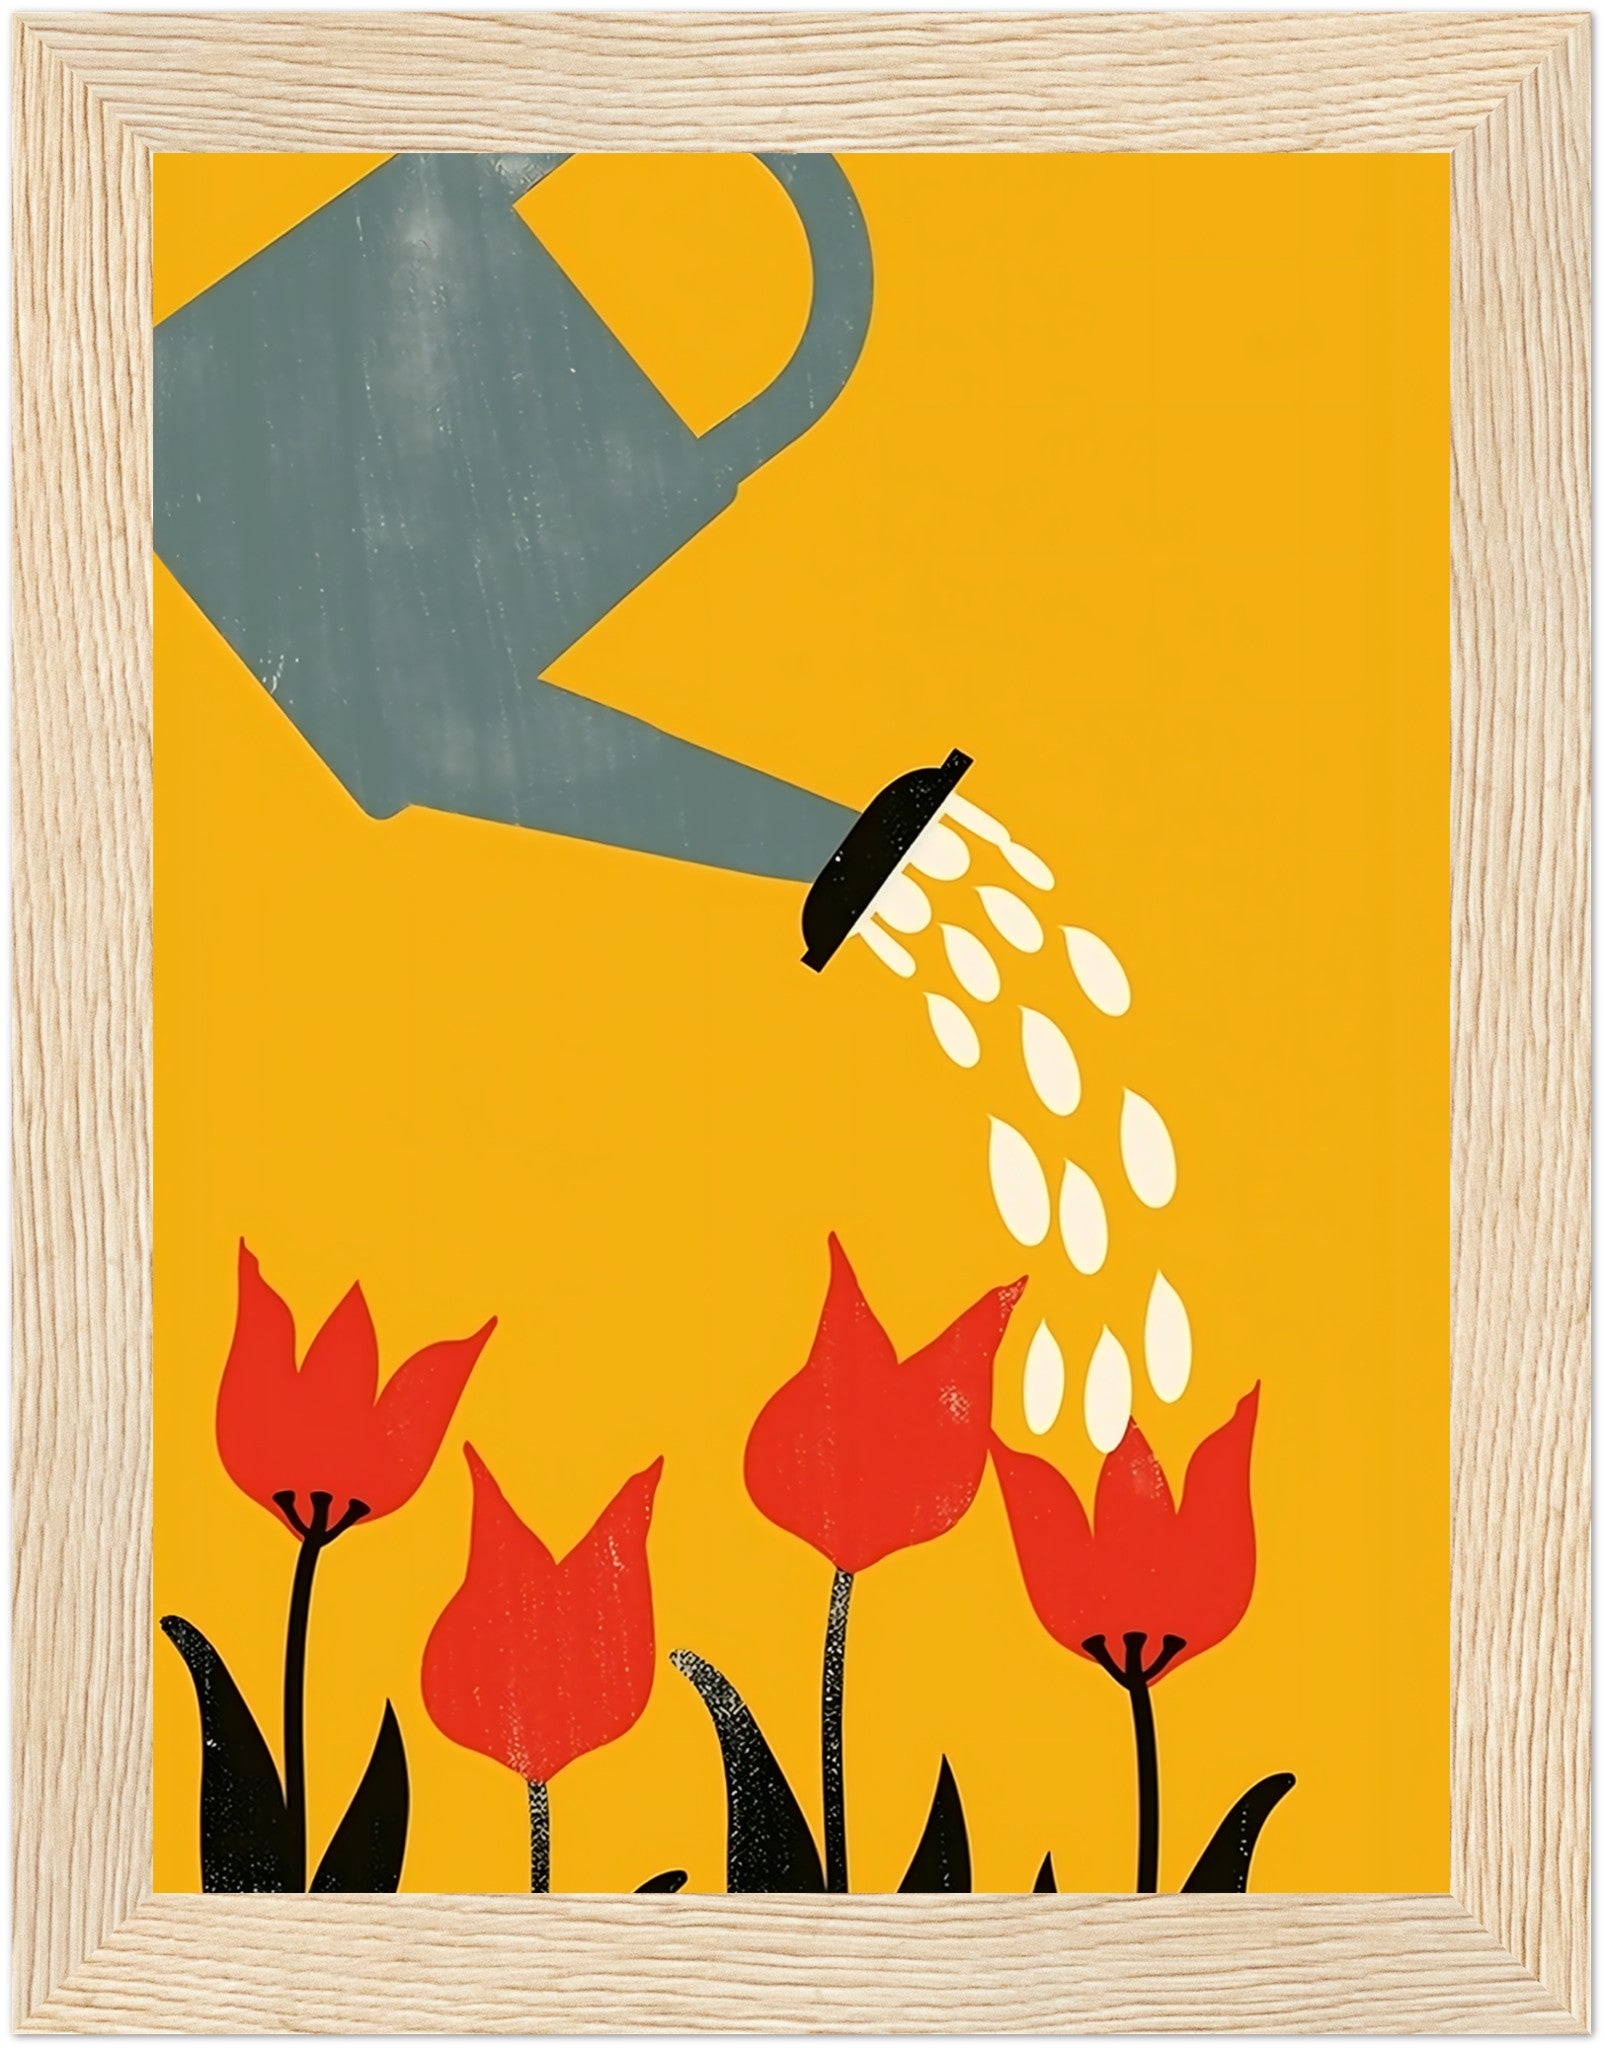 Illustration of a watering can pouring water onto red tulips against a yellow background.